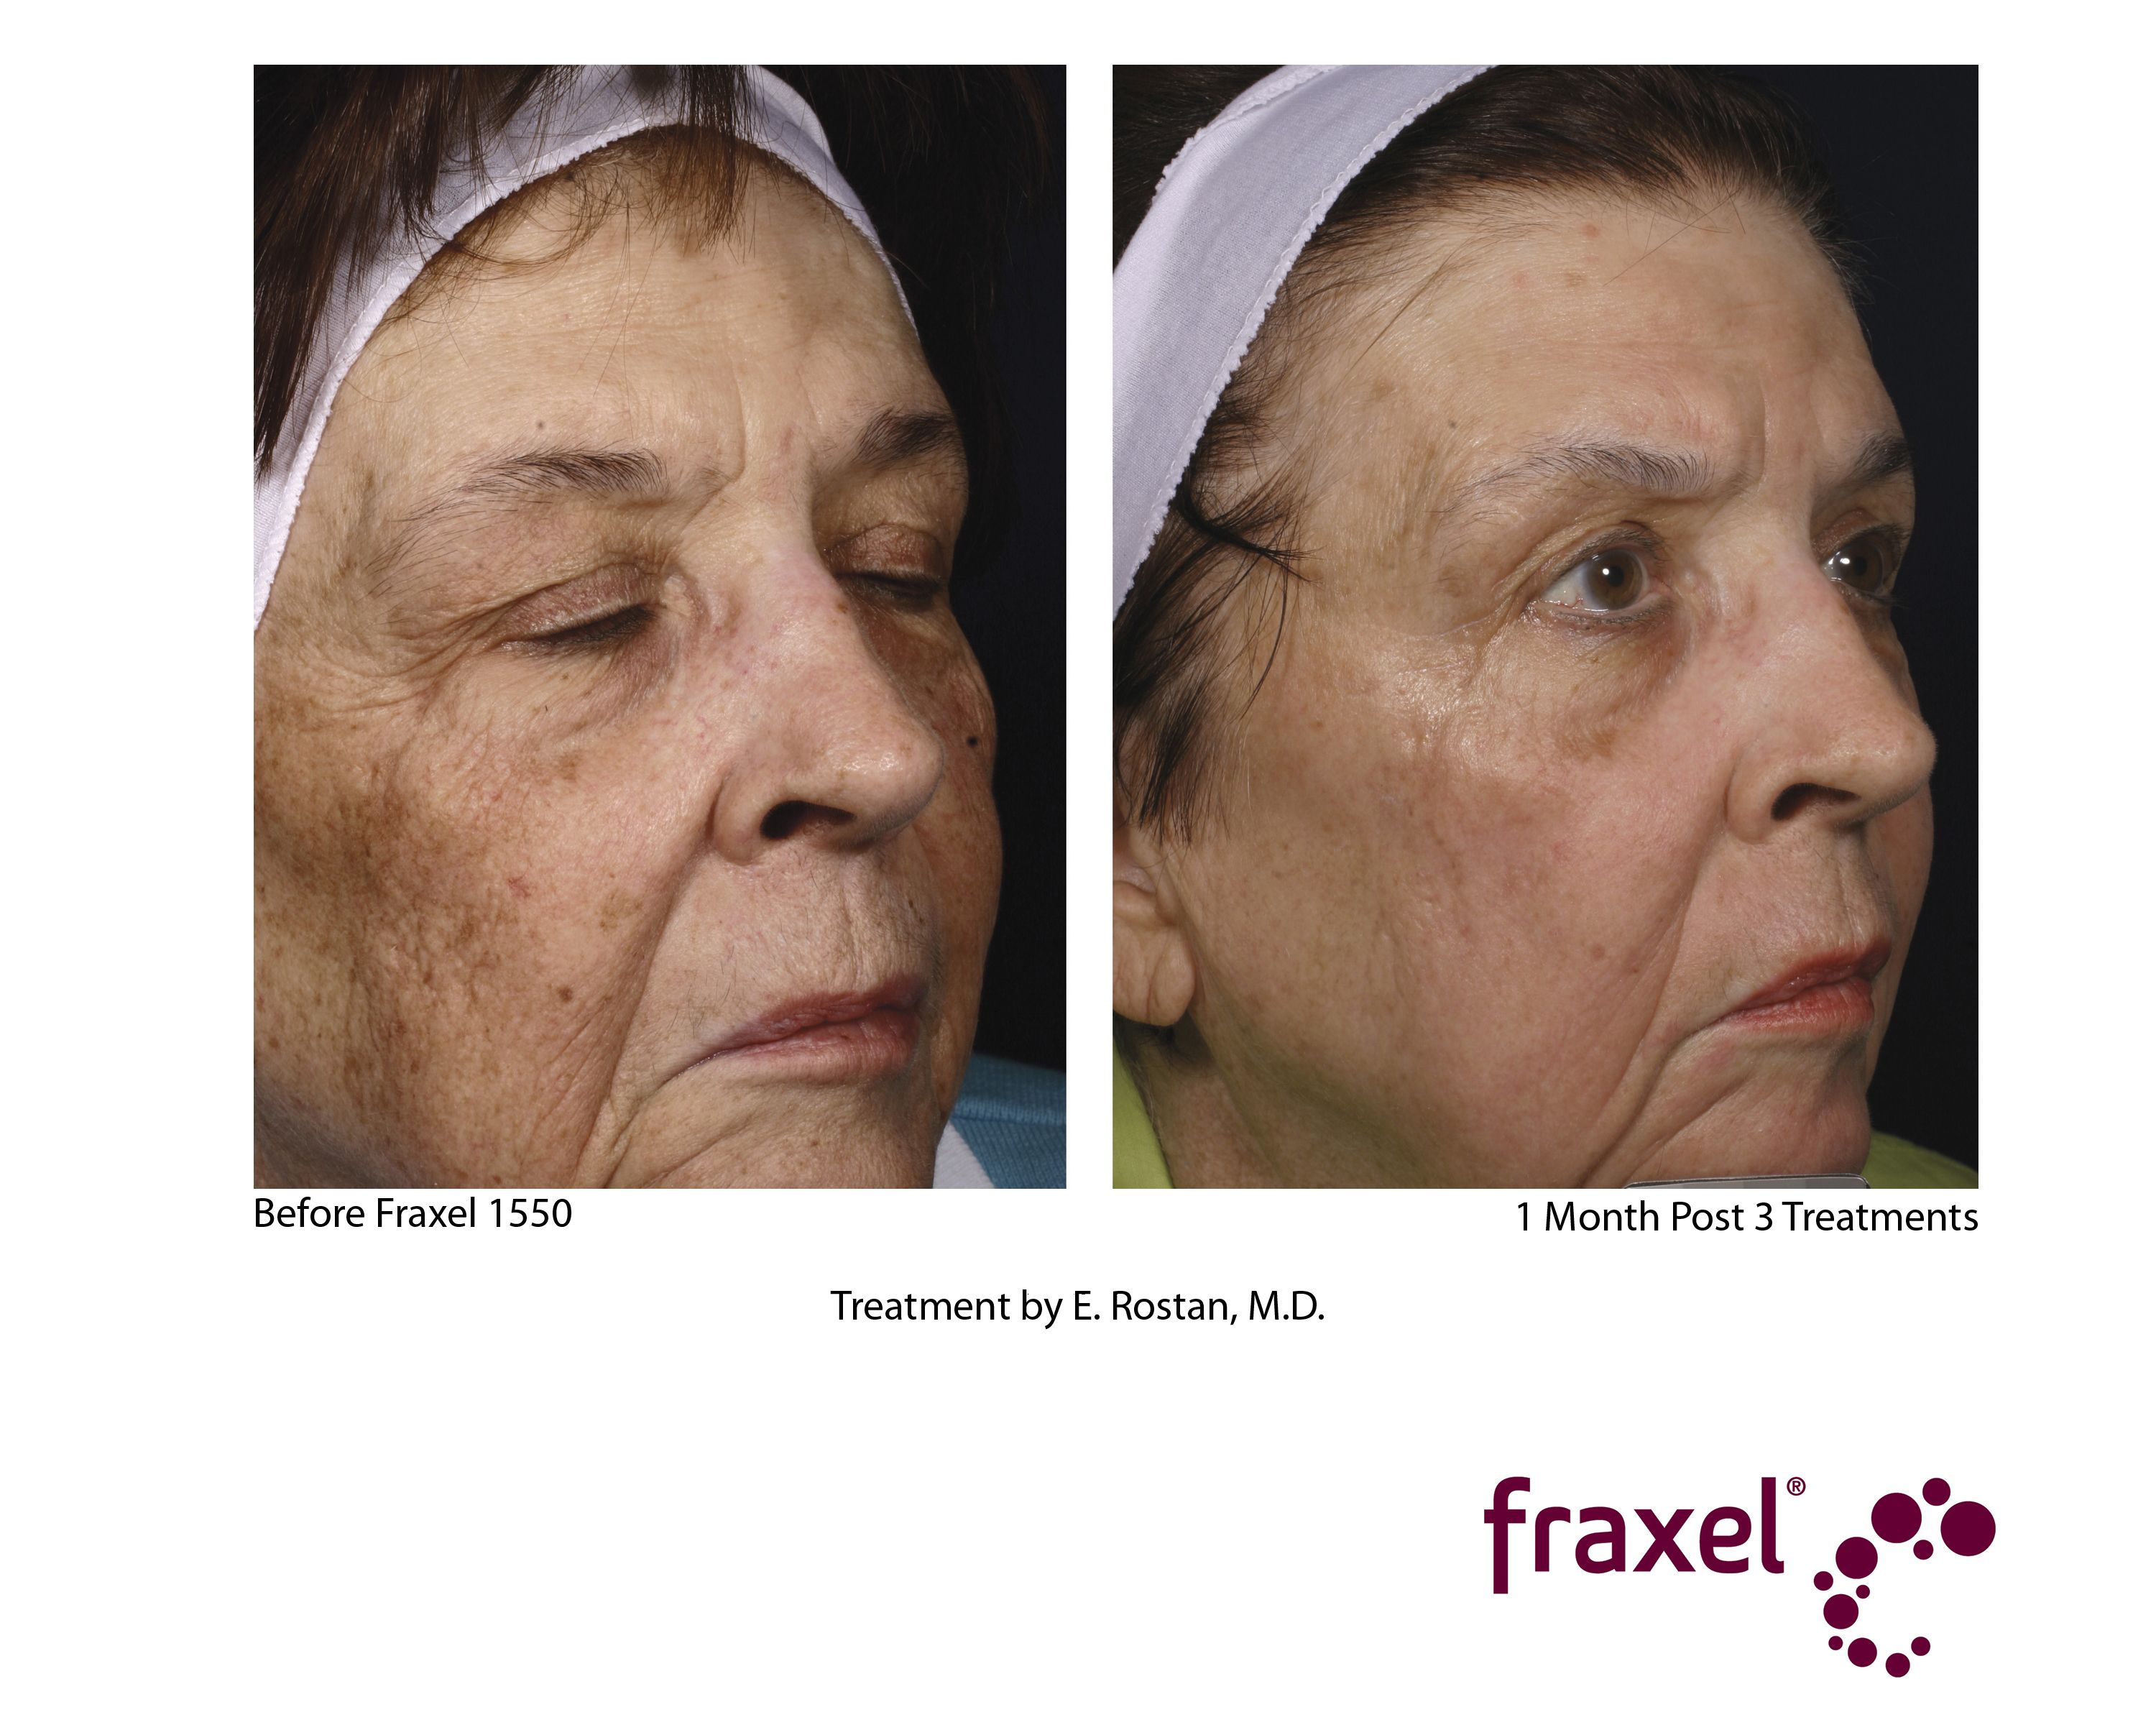 One Month Post 3 Treatments After Fraxel 1550